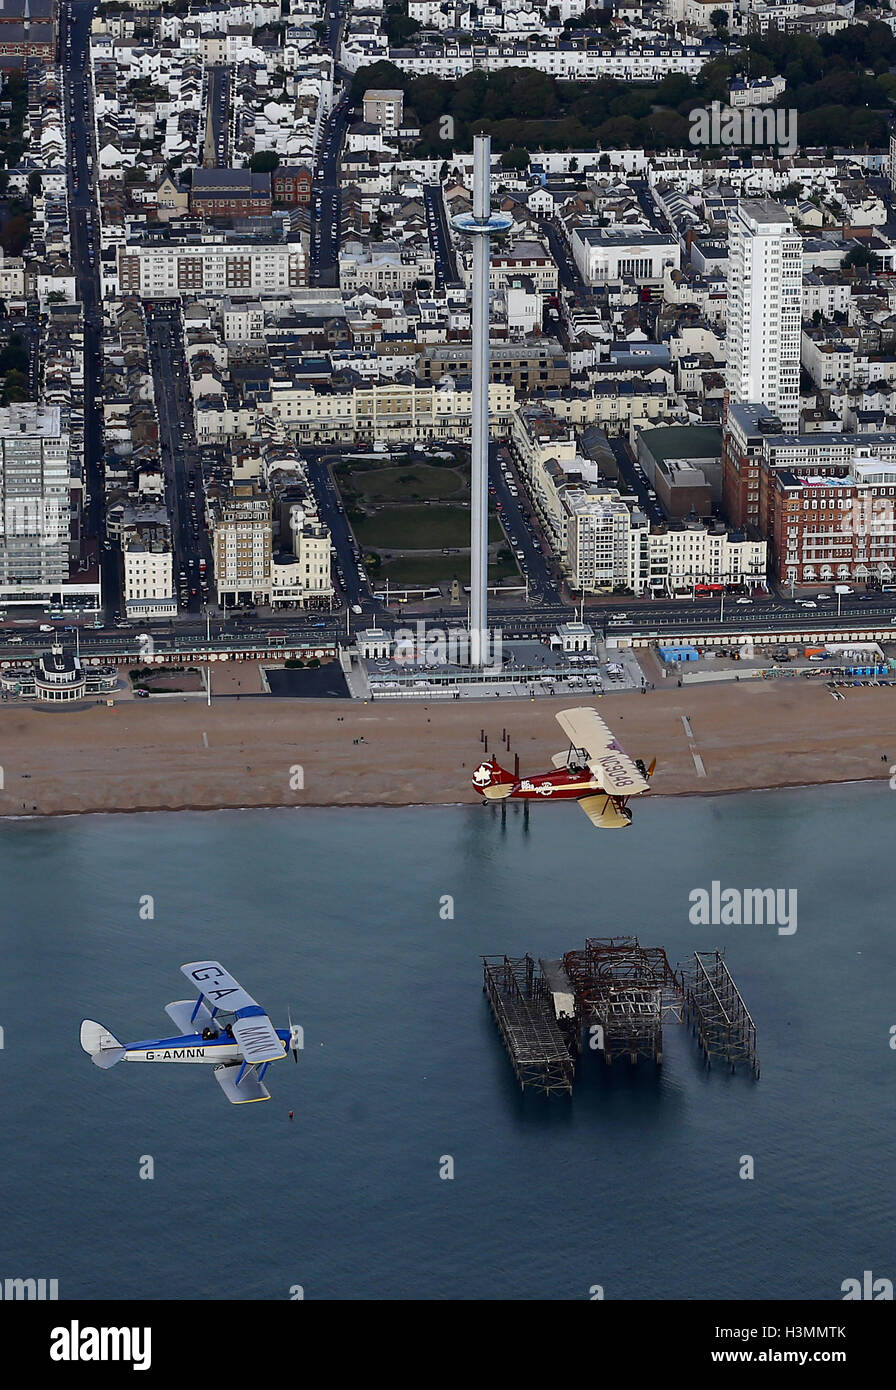 EMBARGOED TO 1030 TUESDAY OCTOBER 11 An English Tiger Moth DH82A (left) and a Canadian Travel Air 4000 fly over Brighton in East Sussex during a photo call for vintage bi-planes before the announcement of an 8,000+ mile Vintage Air Rally. The aviation adventure, across Africa with 10 international teams, will recreate the pioneering days of flight from the 1920s testing the pilots skills and aircraft, while raising funds for charity. Stock Photo